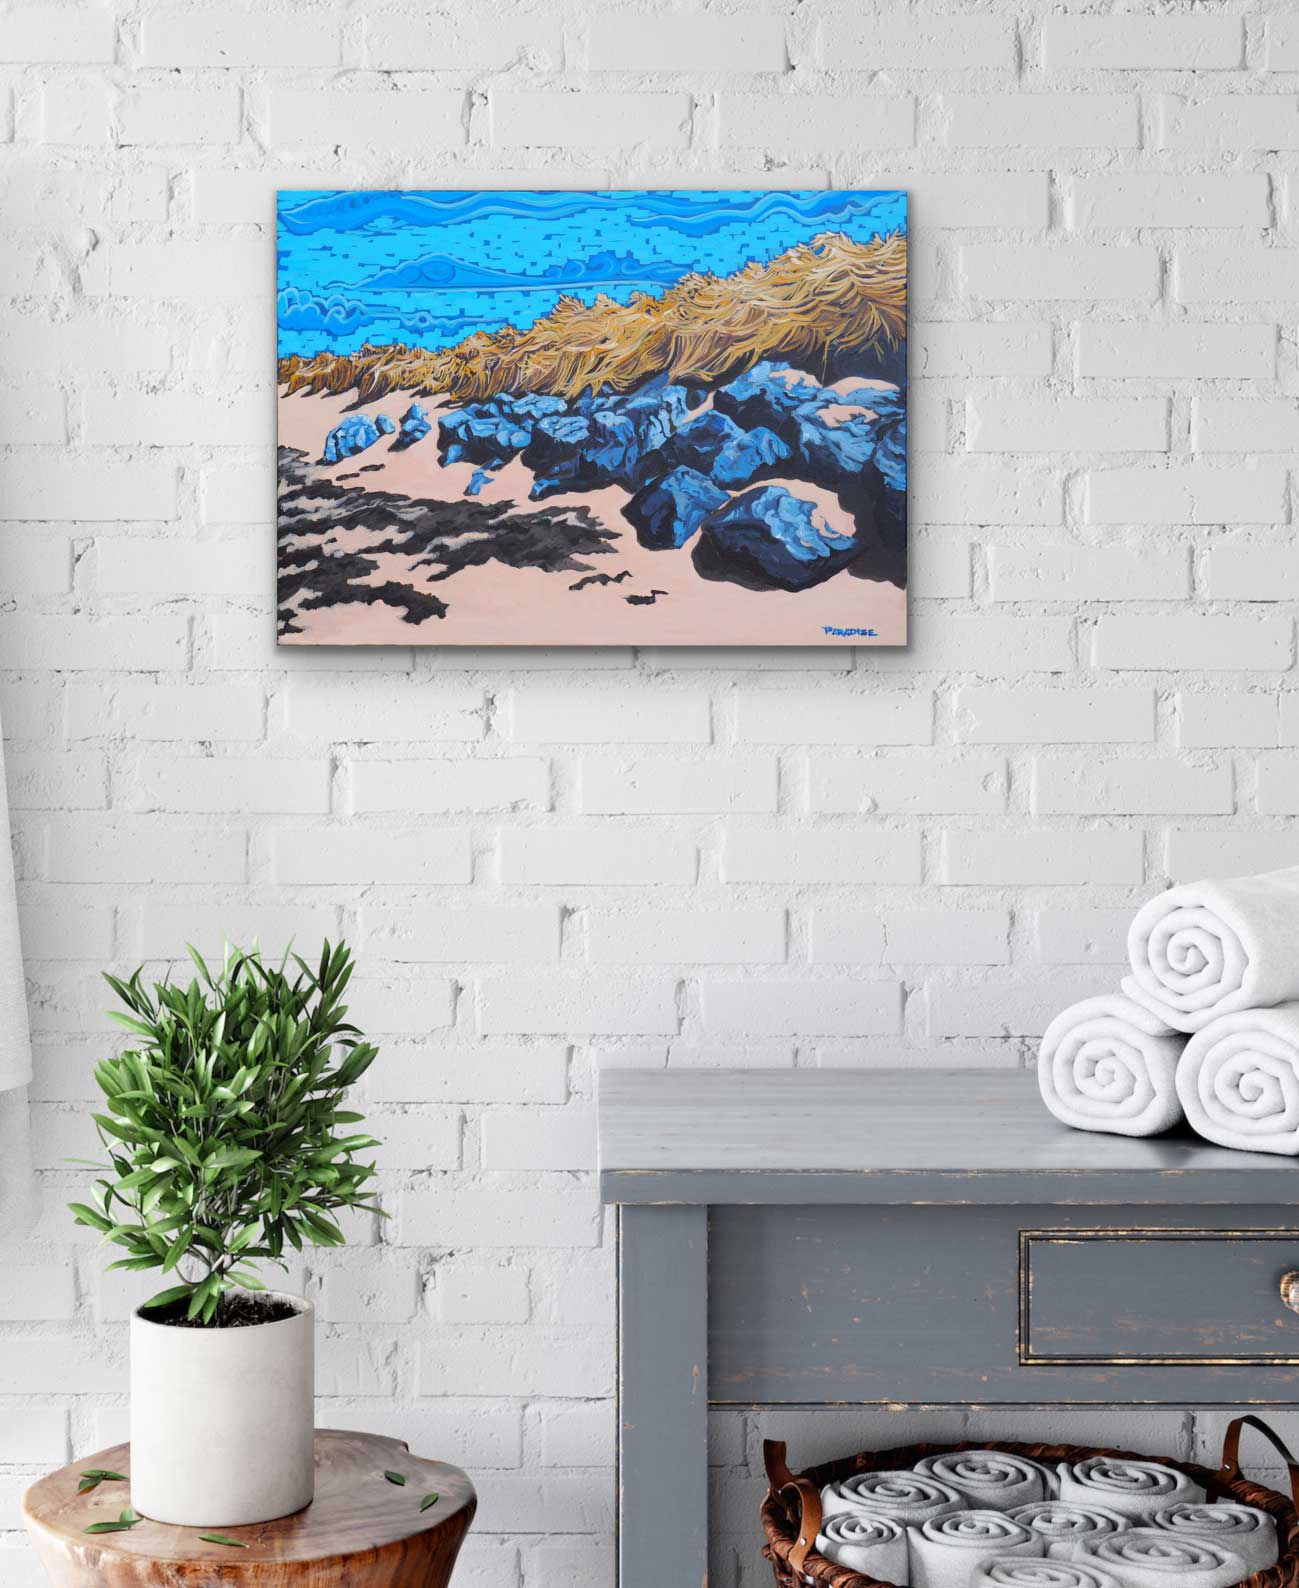 nova scotia painting of the beach by a professional canadian landscape artist. visual art ready to hang on your wall.